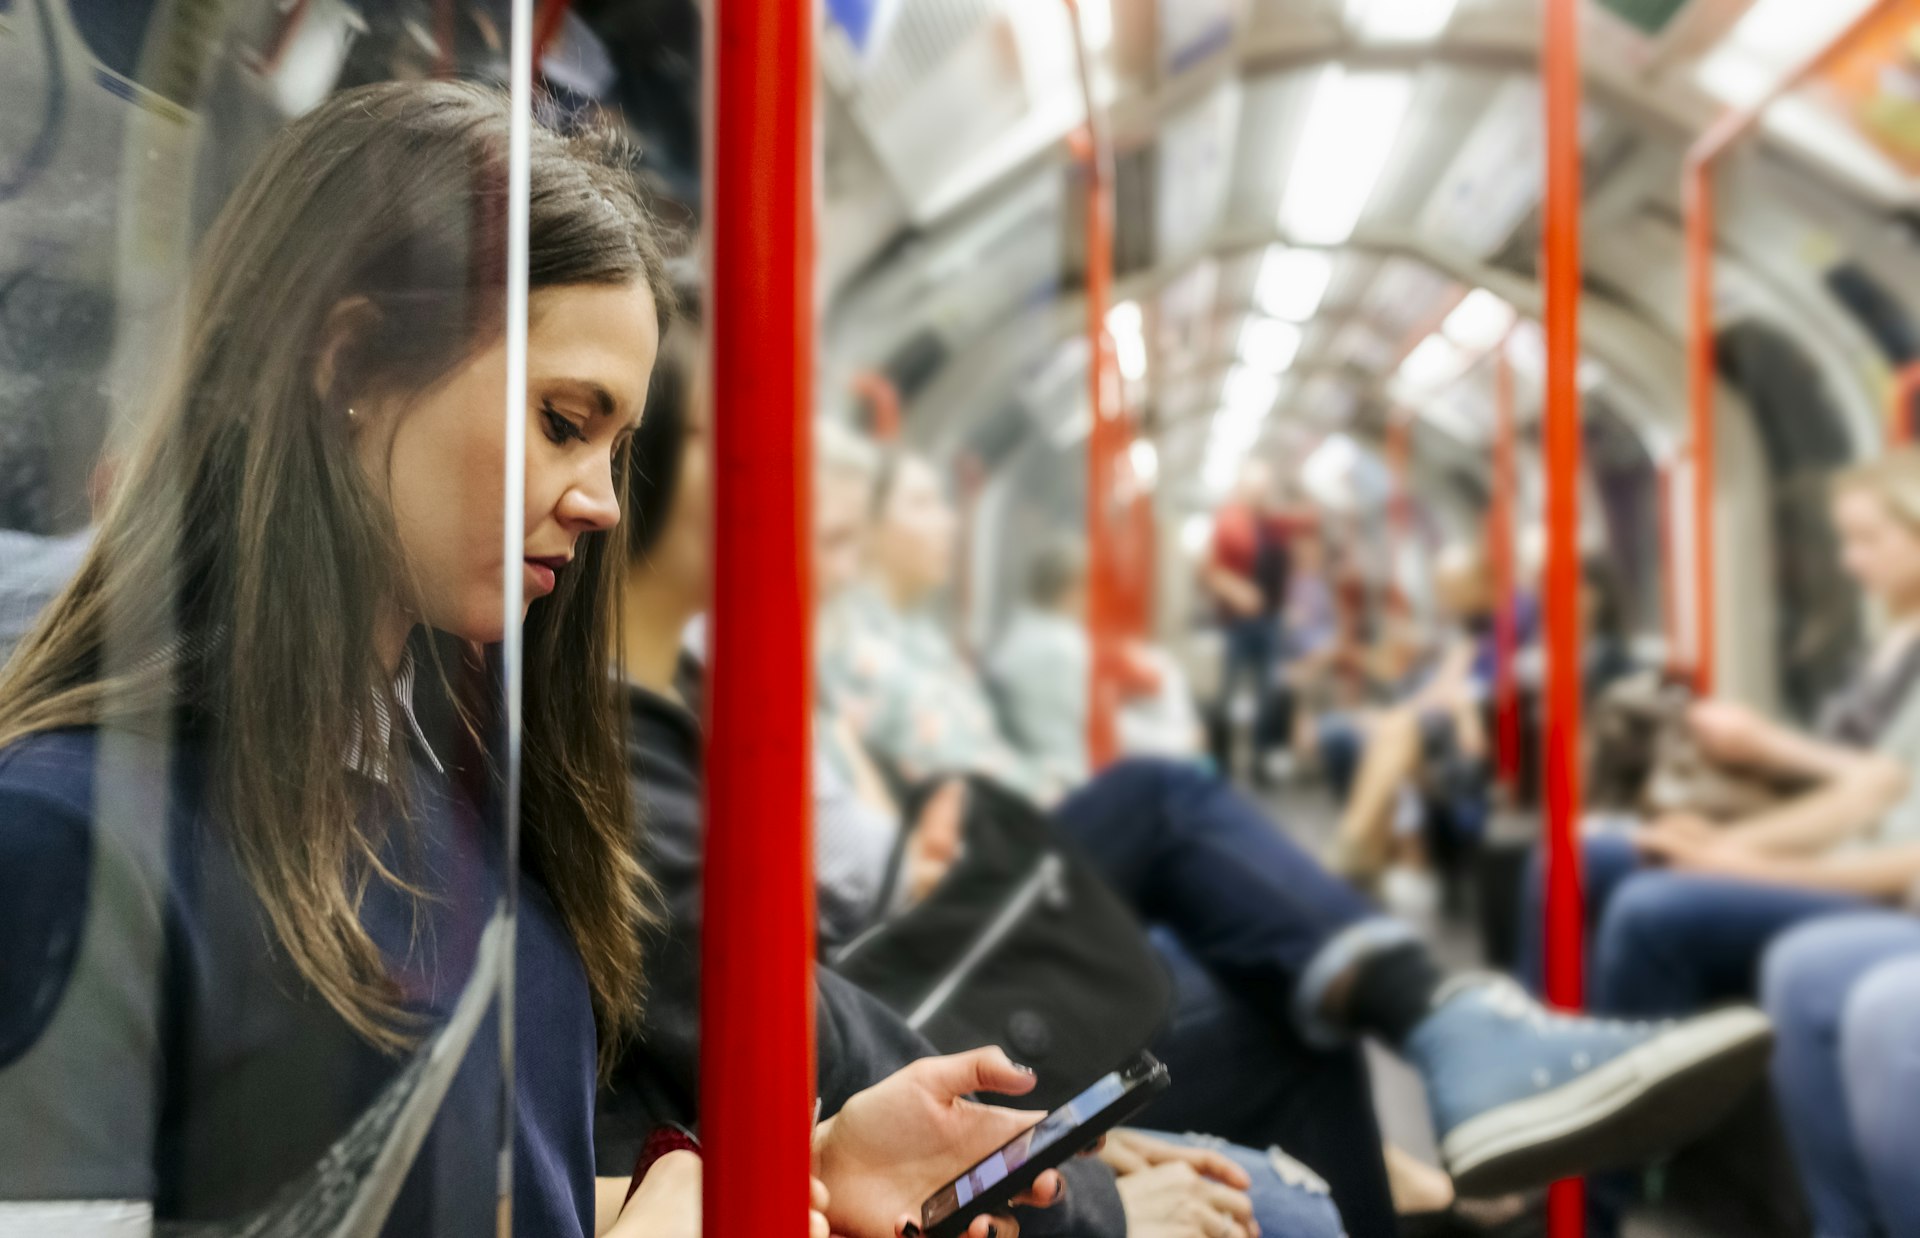 A side view of a woman sitting on the London tube looking at her phone